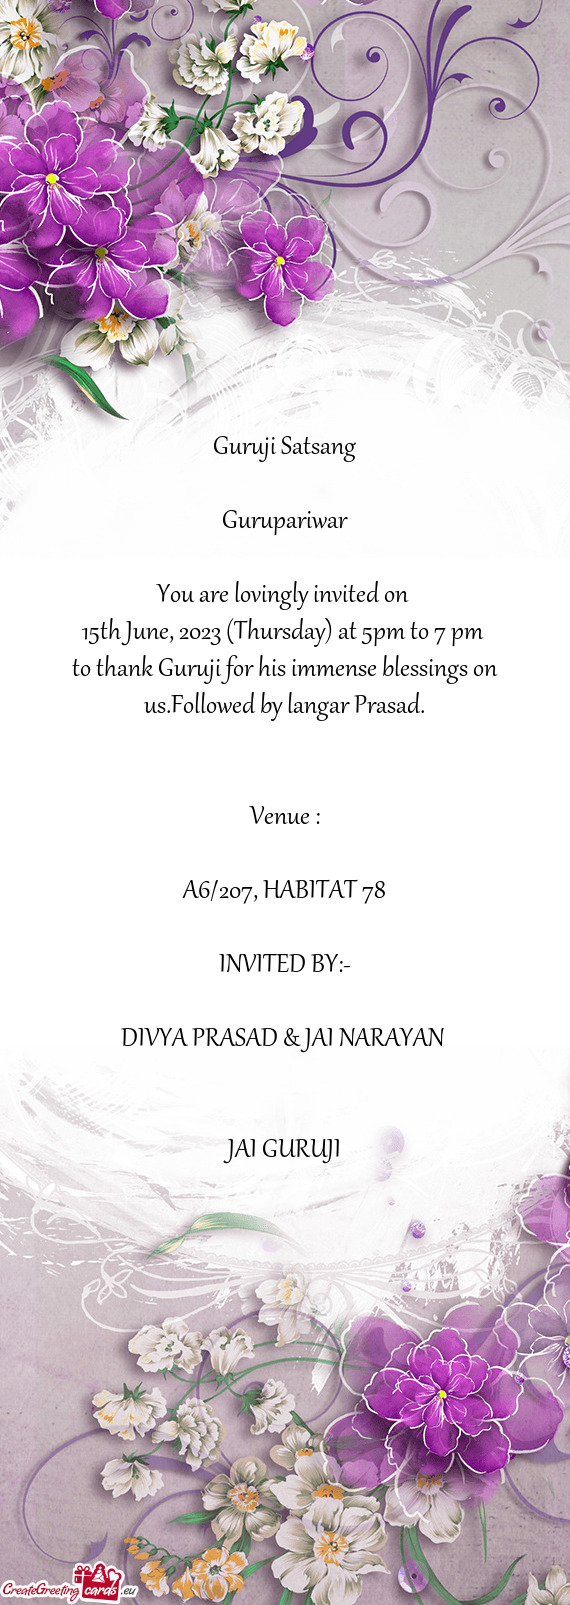 15th June, 2023 (Thursday) at 5pm to 7 pm